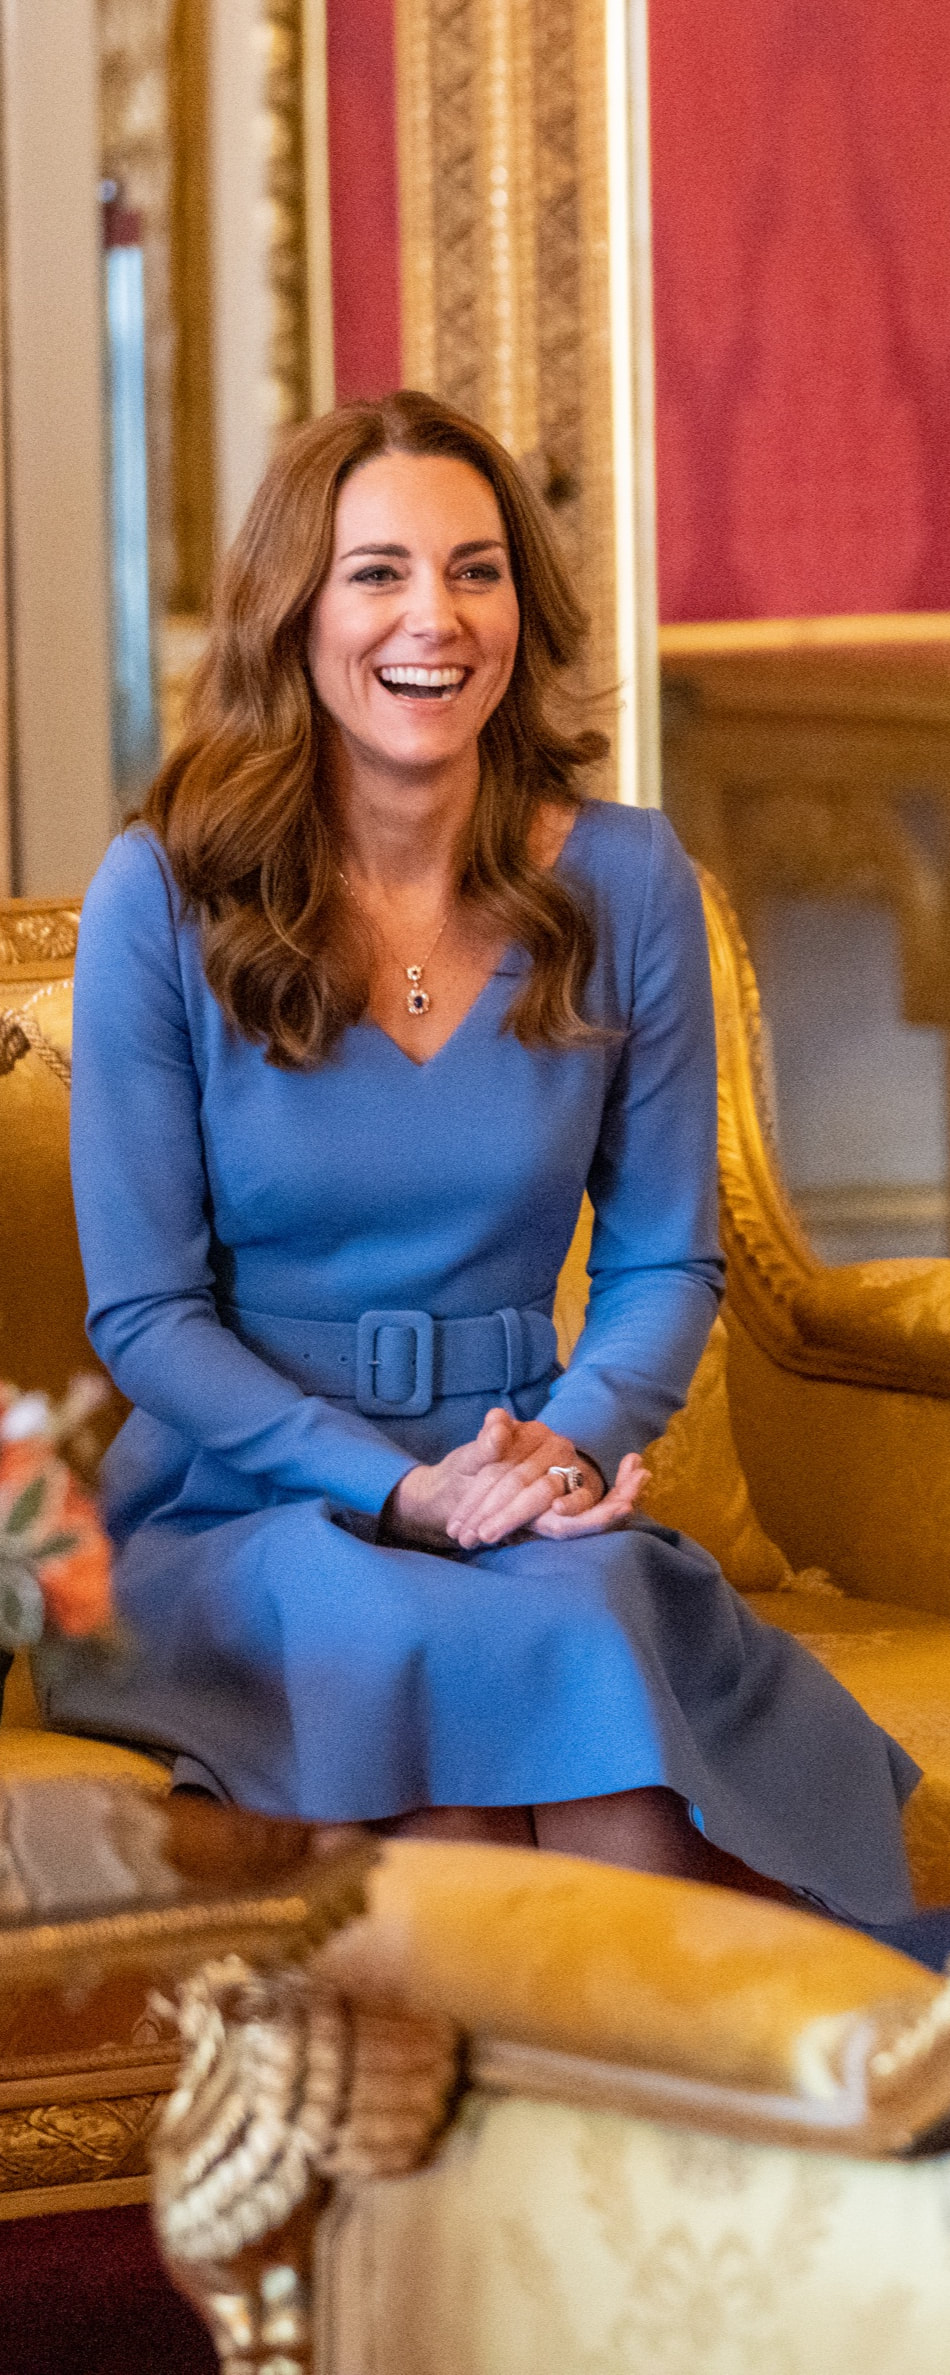 The Duchess of Cambridge held an audience with Ukrainian President & First Lady on 7 October 2020